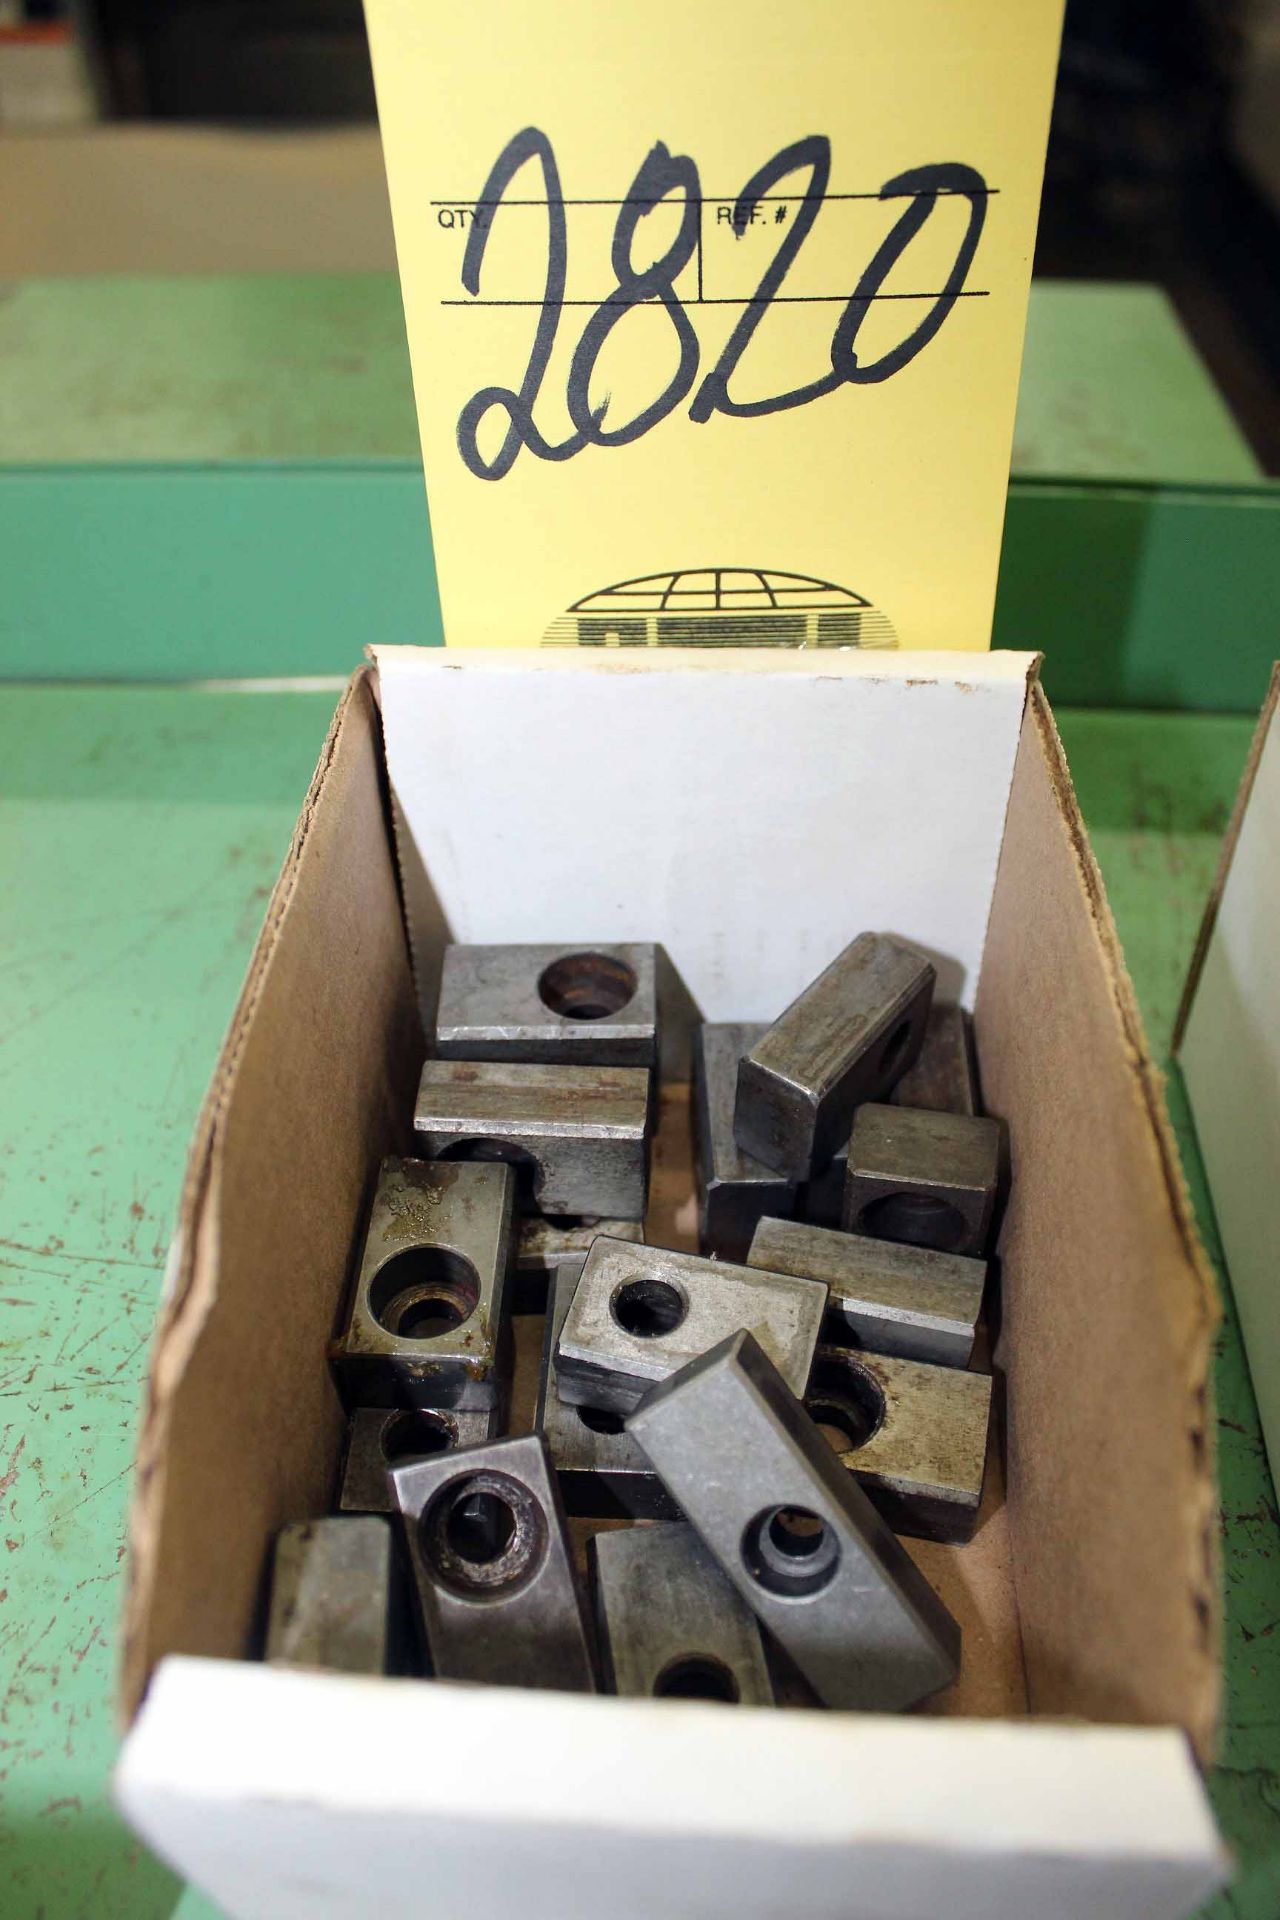 LOT OF THROUGH COOLANT HOLDERS (in one box)